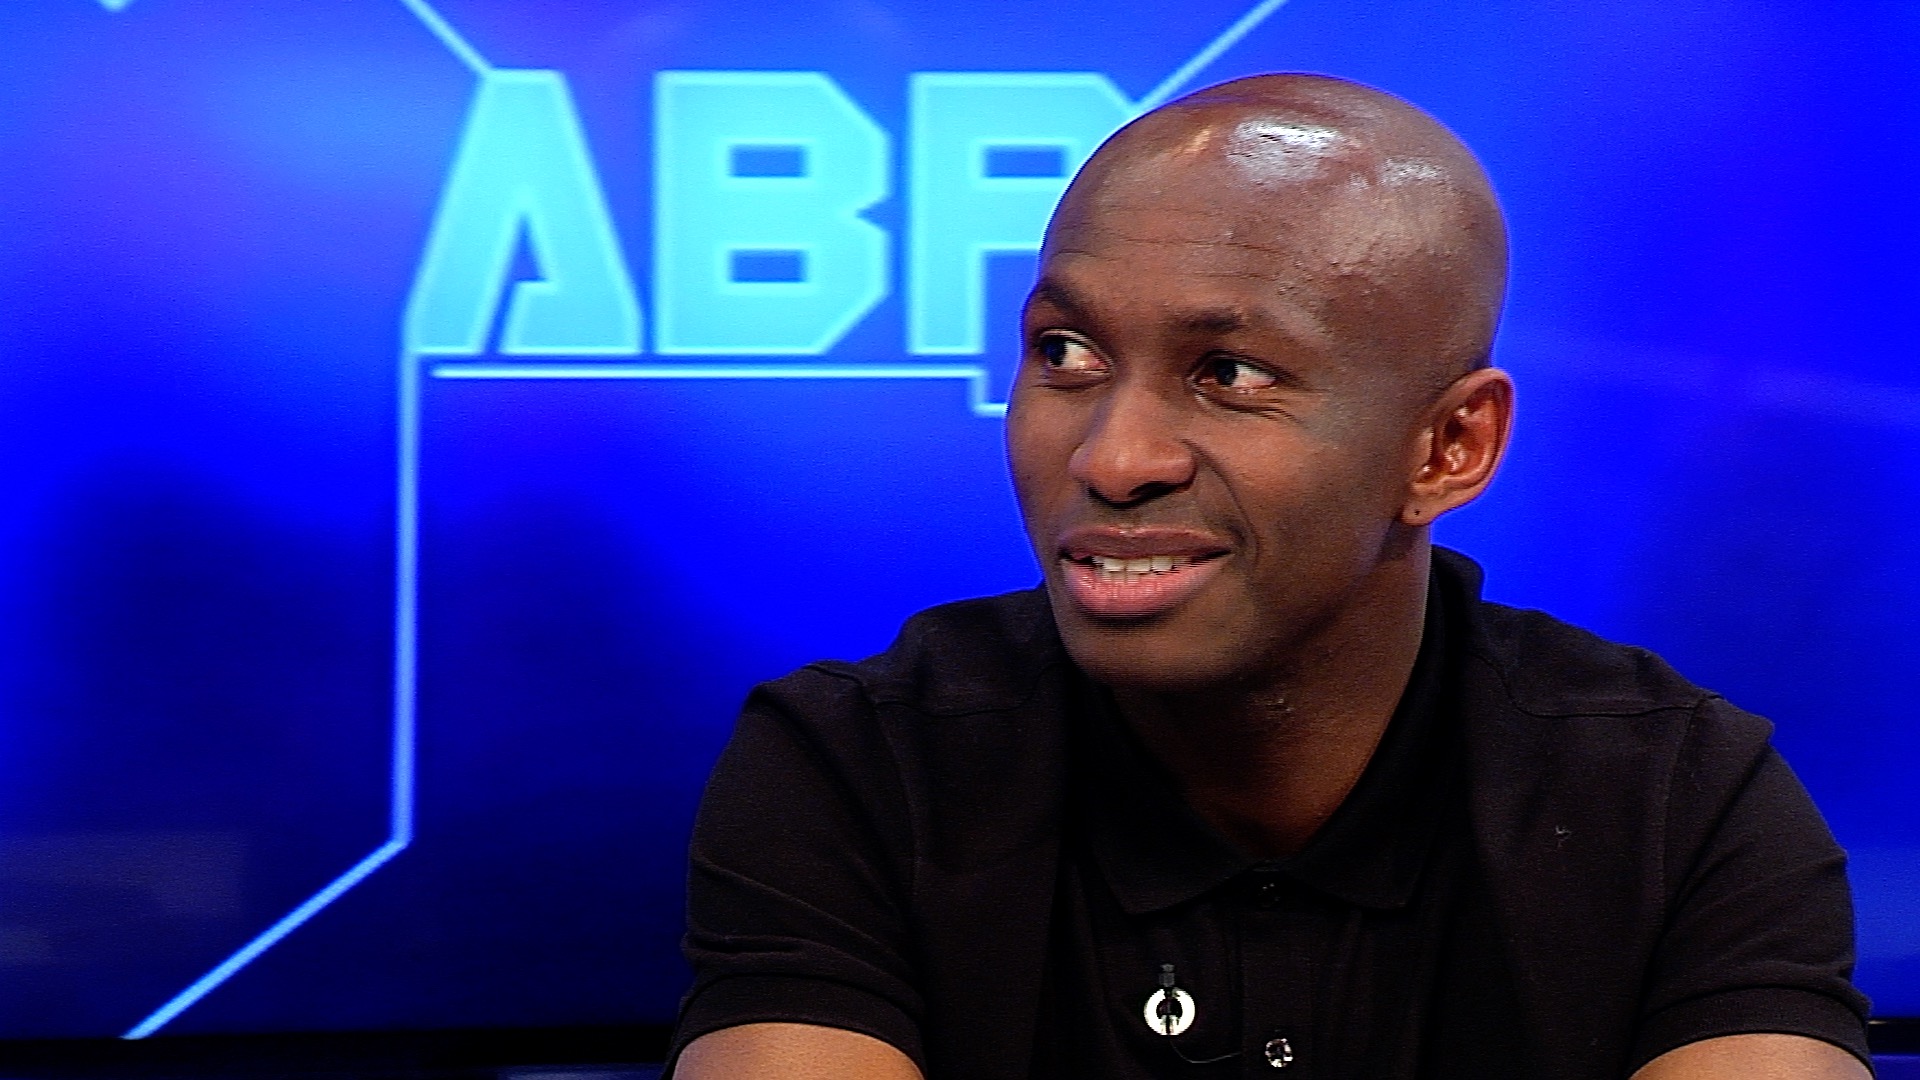 Mbia on ABP